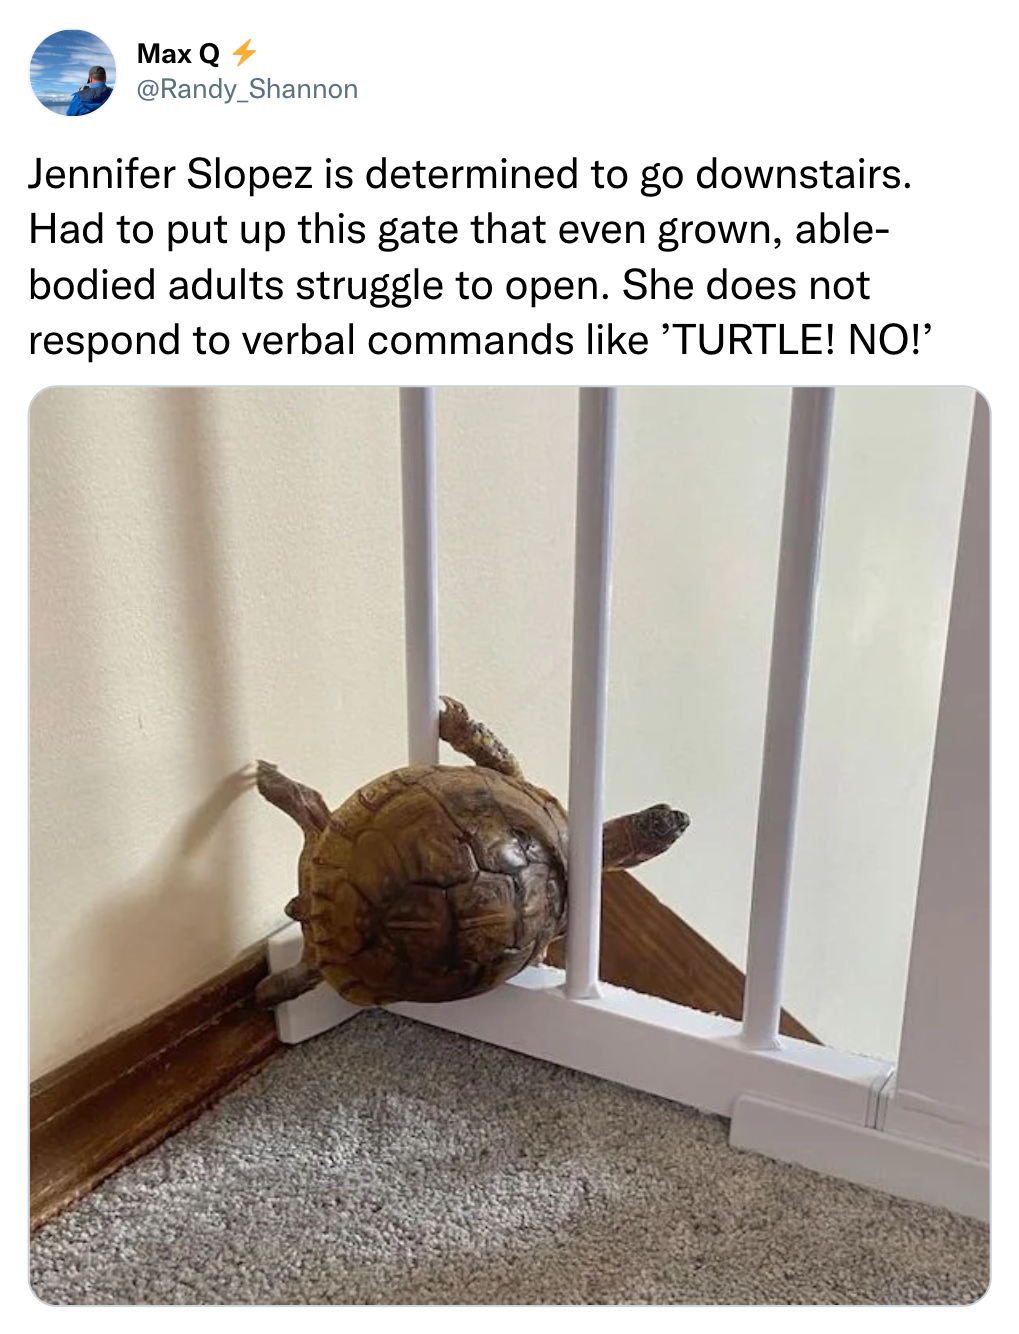 funny tweets  - jennifer slopez turtle - Max Q Randy Shannon Jennifer Slopez is determined to go downstairs. Had to put up this gate that even grown, able bodied adults struggle to open. She does not respond to verbal commands 'Turtle! No!